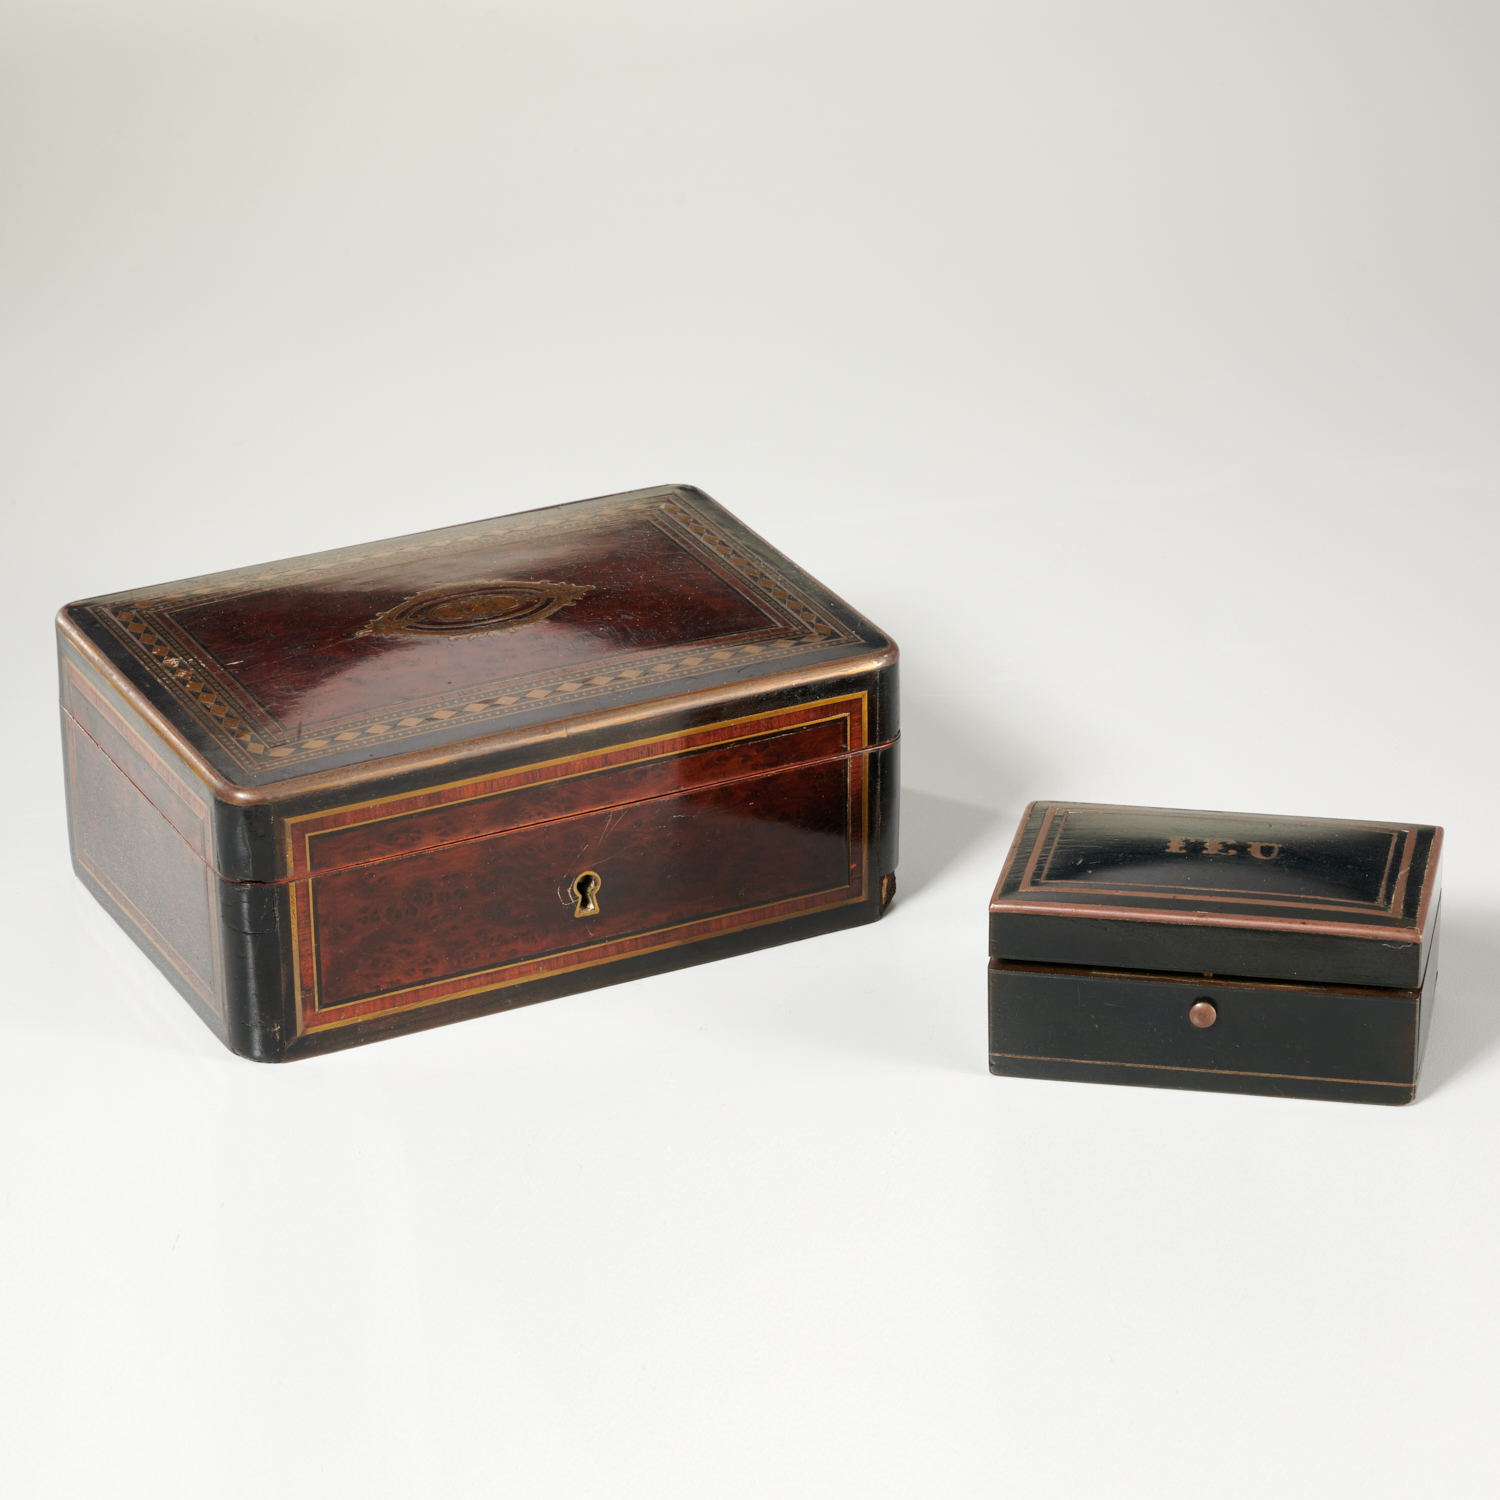  2 FRENCH BRASS INLAID BOXES  2ce15a